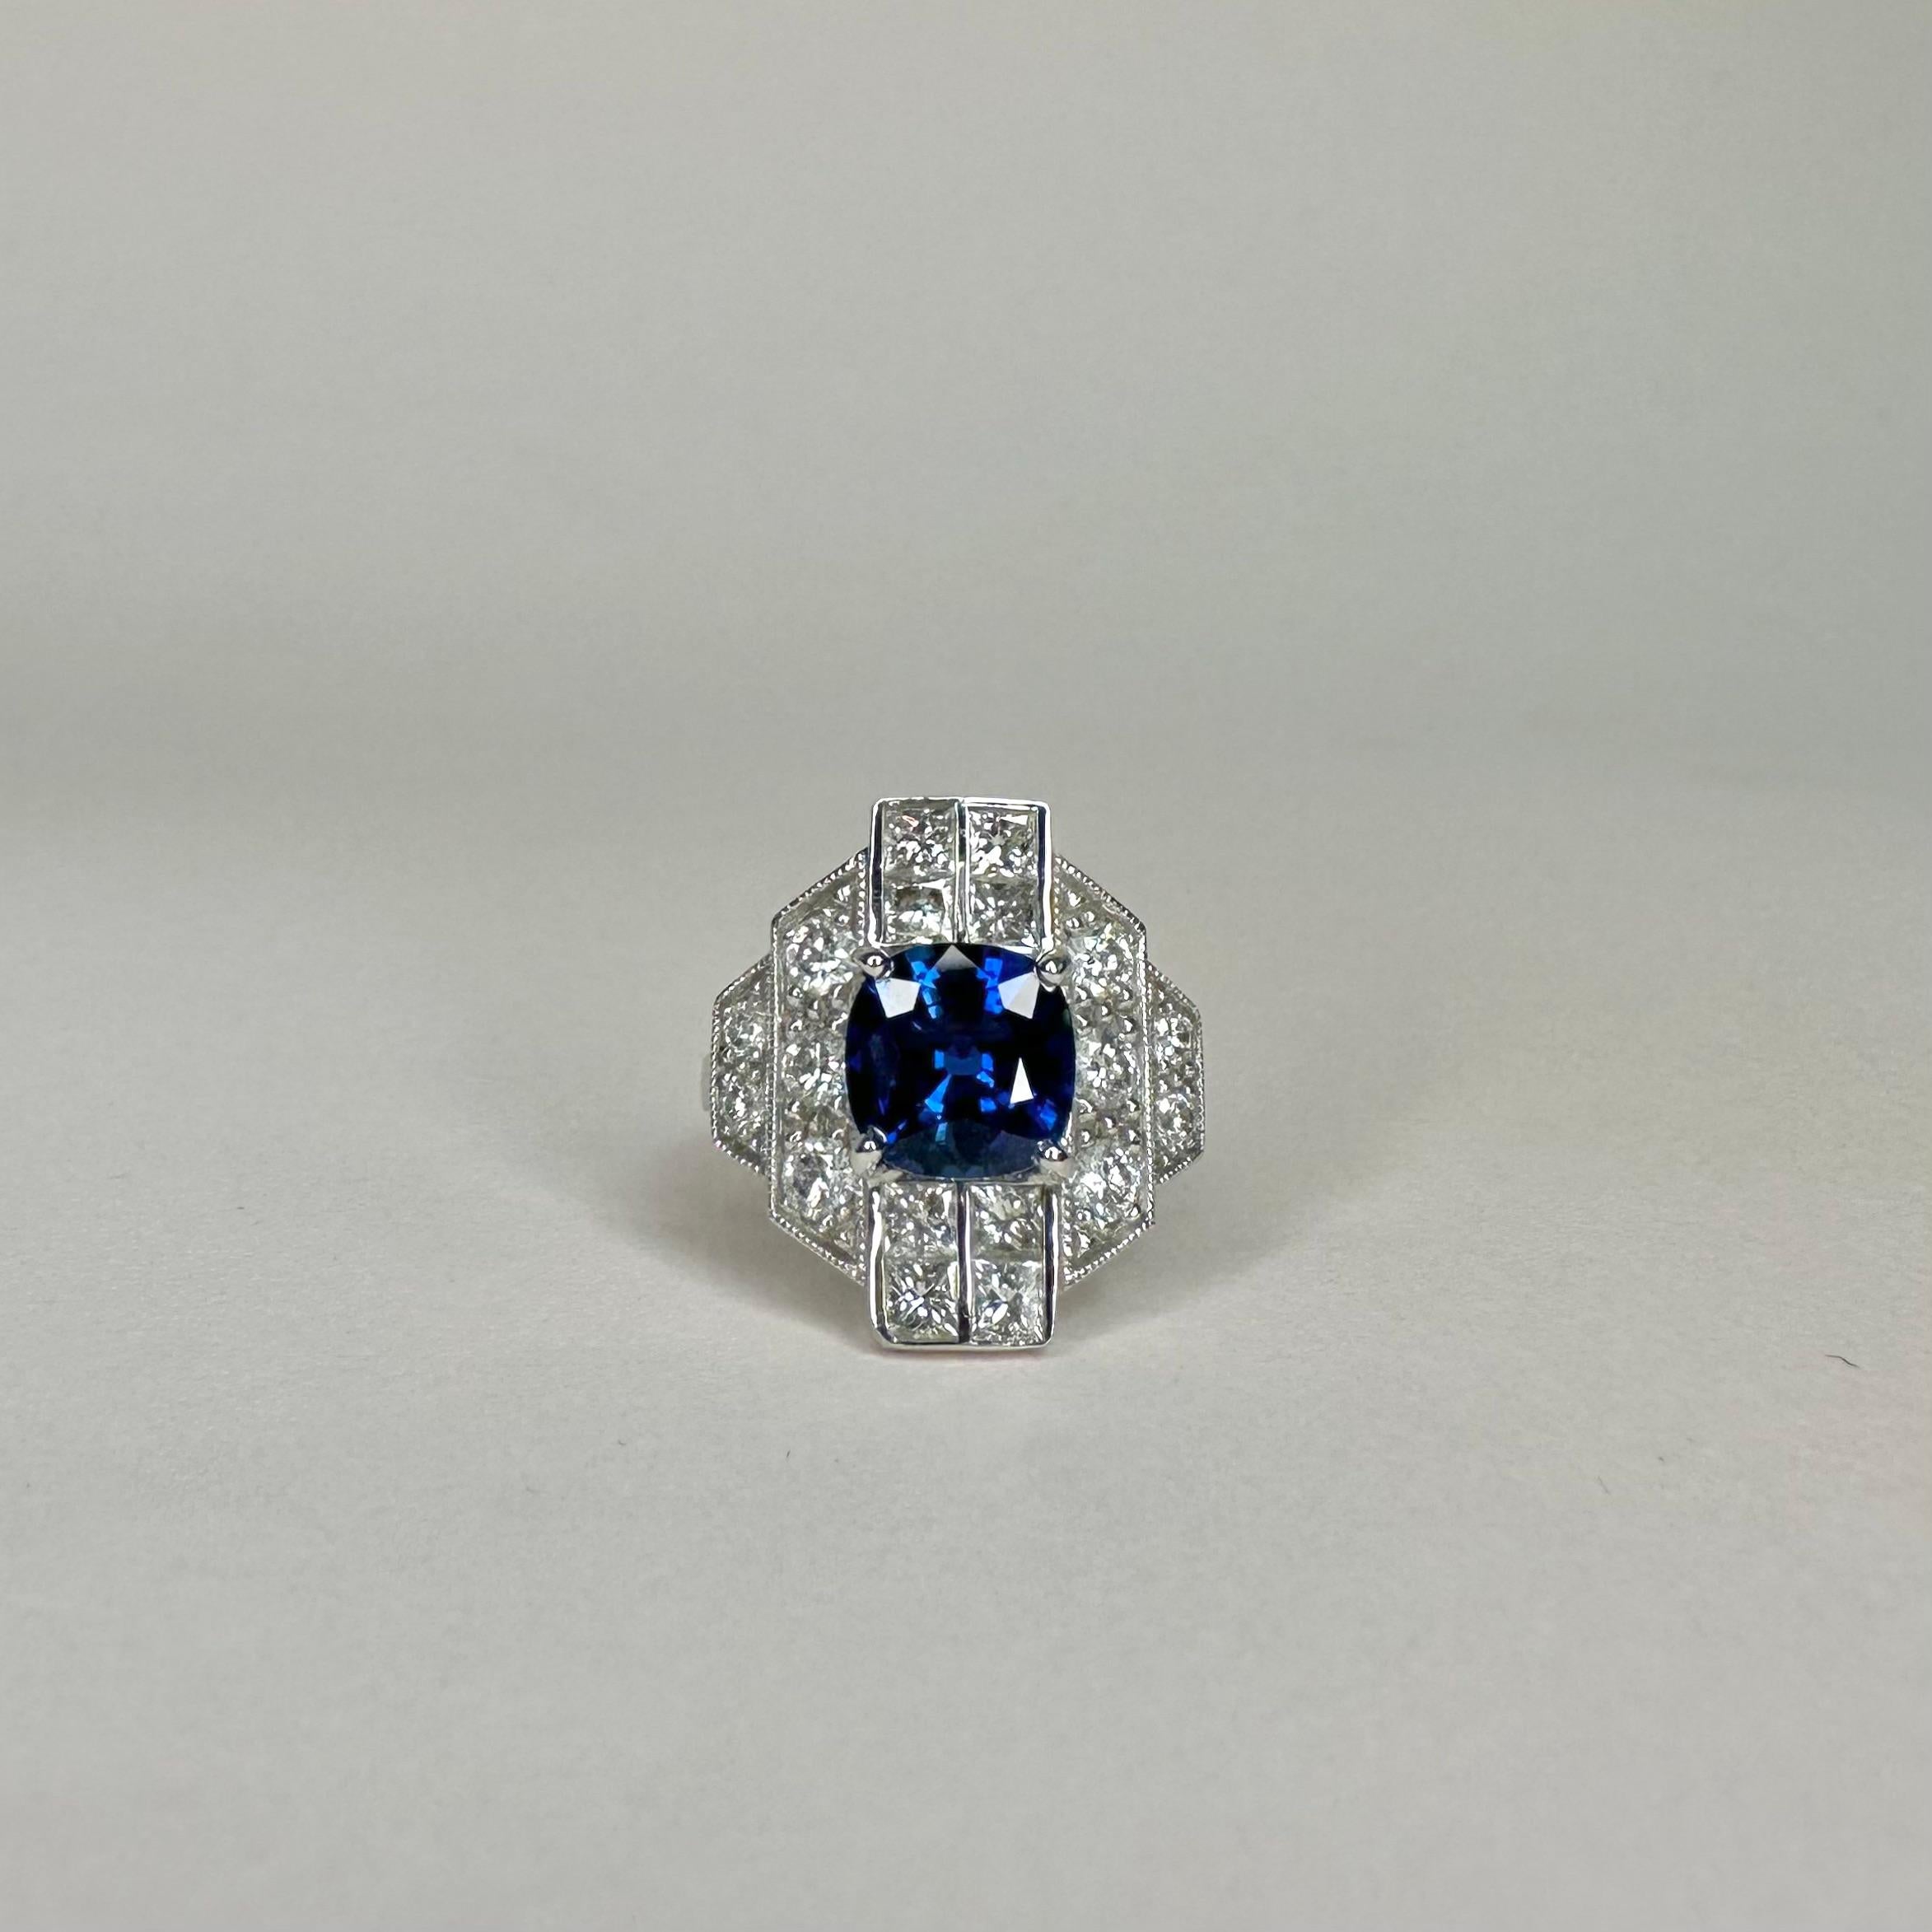 For Sale:  18k White Gold 2.65 Ct Royal Blue Cushion Sapphire Ring Set with 1.69 Ct Diamond 2